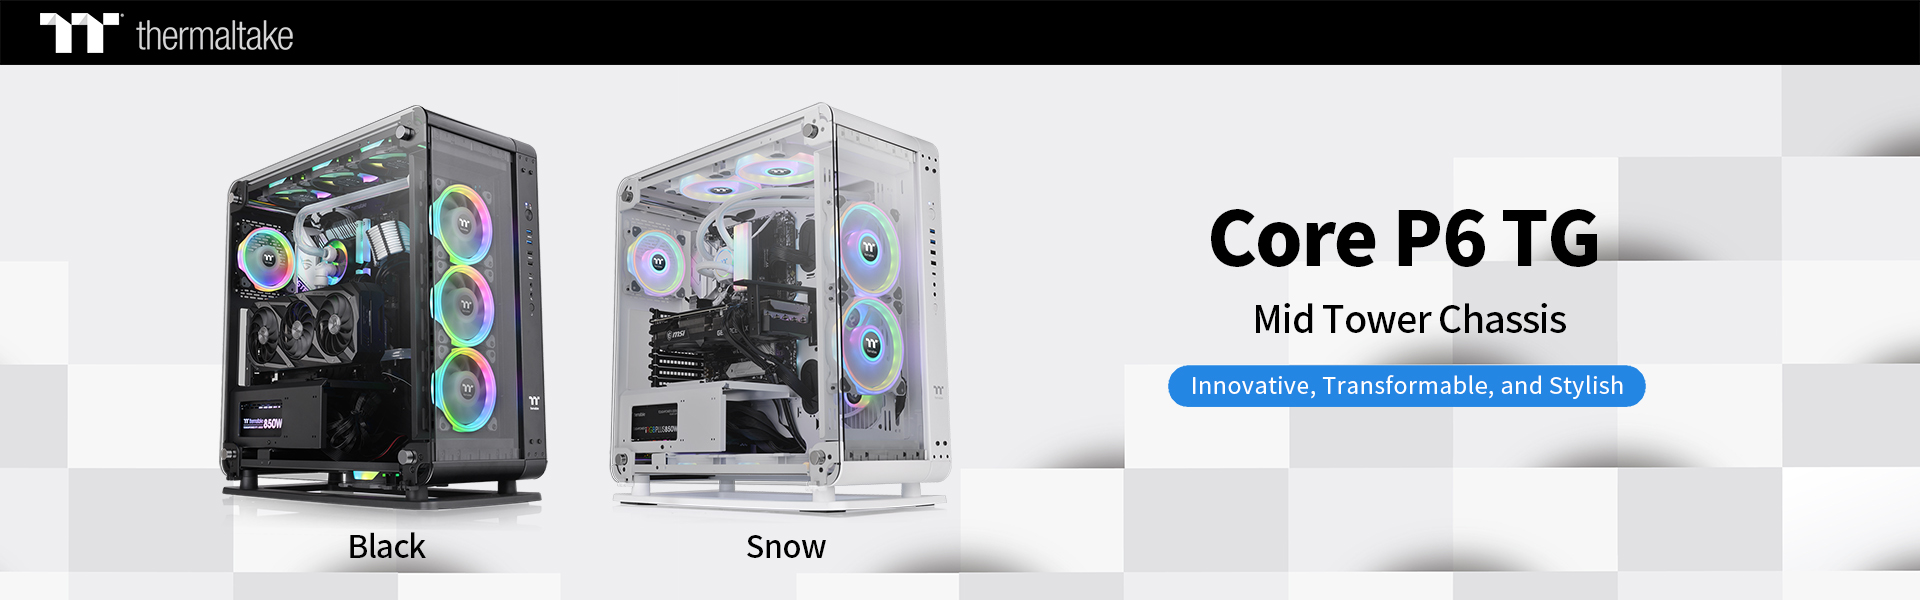 Thermaltake New Core P6 TG and Core P6 TG Snow_2